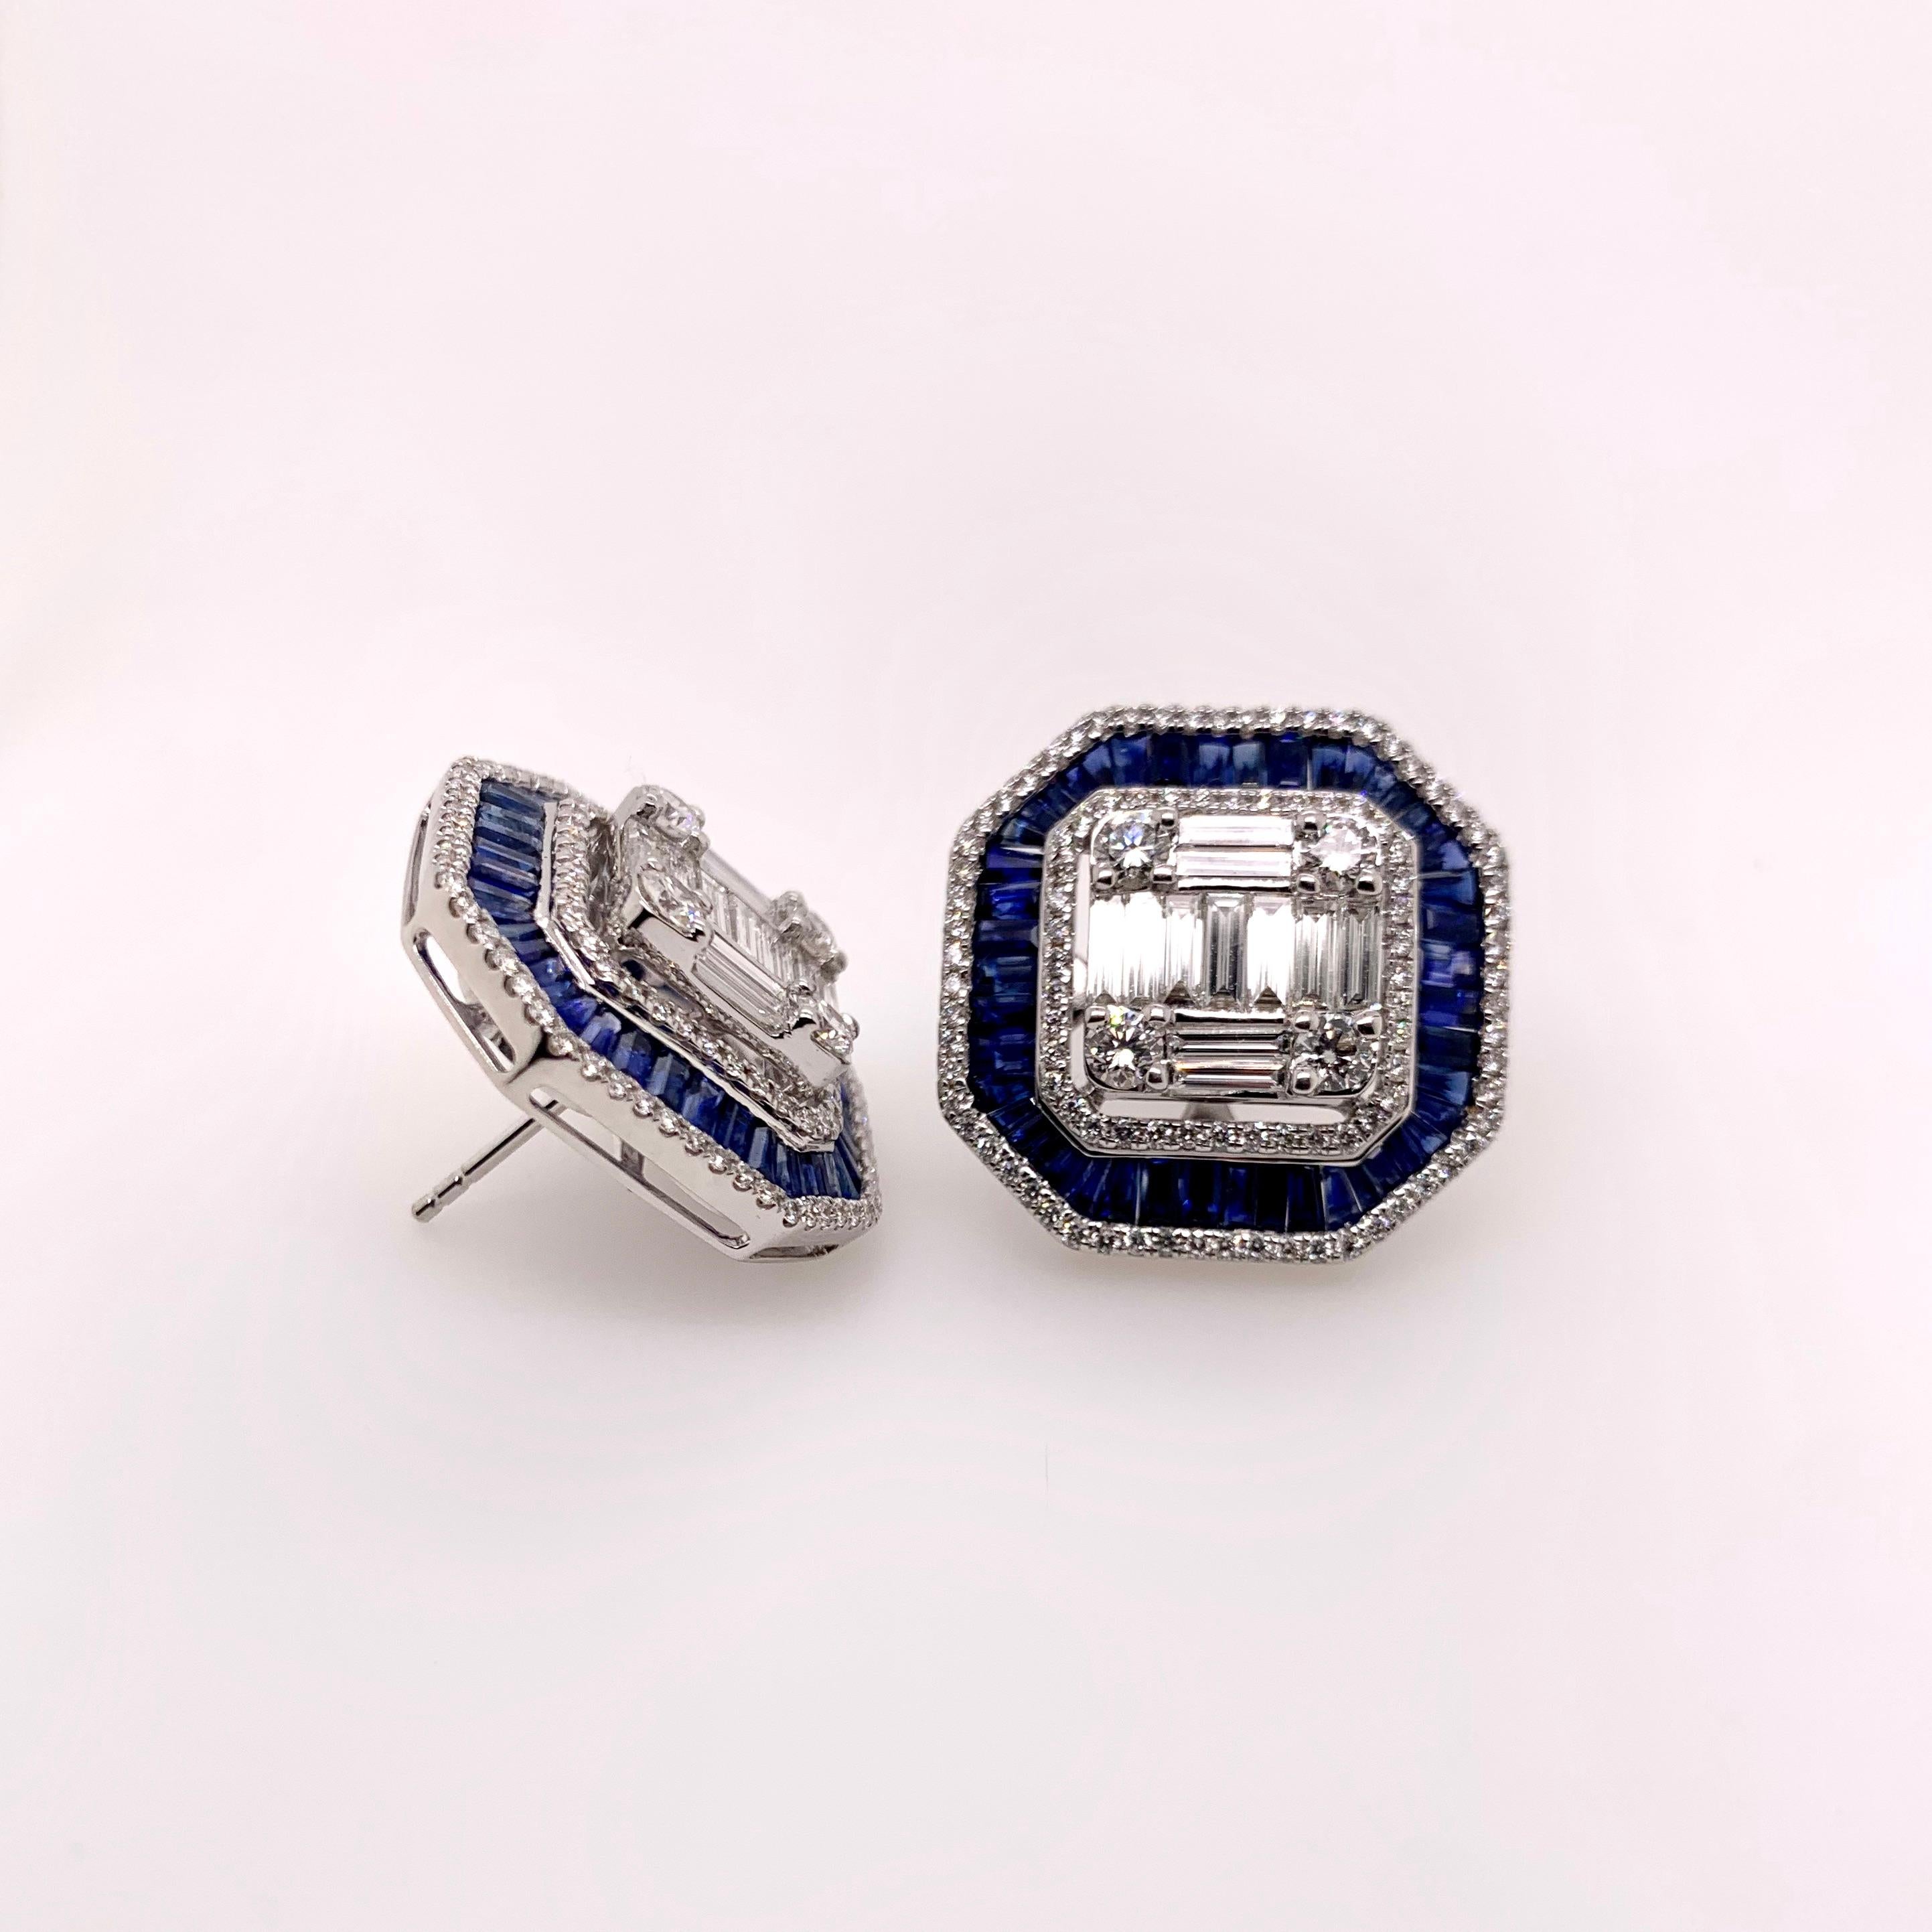 This is a stunning pair of blue sapphire and diamond earrings that has a subtle vintage appeal.  It is carefully crafted with round brilliant and baguette diamonds that form the foundation of the earring while the blue sapphire is carefully placed